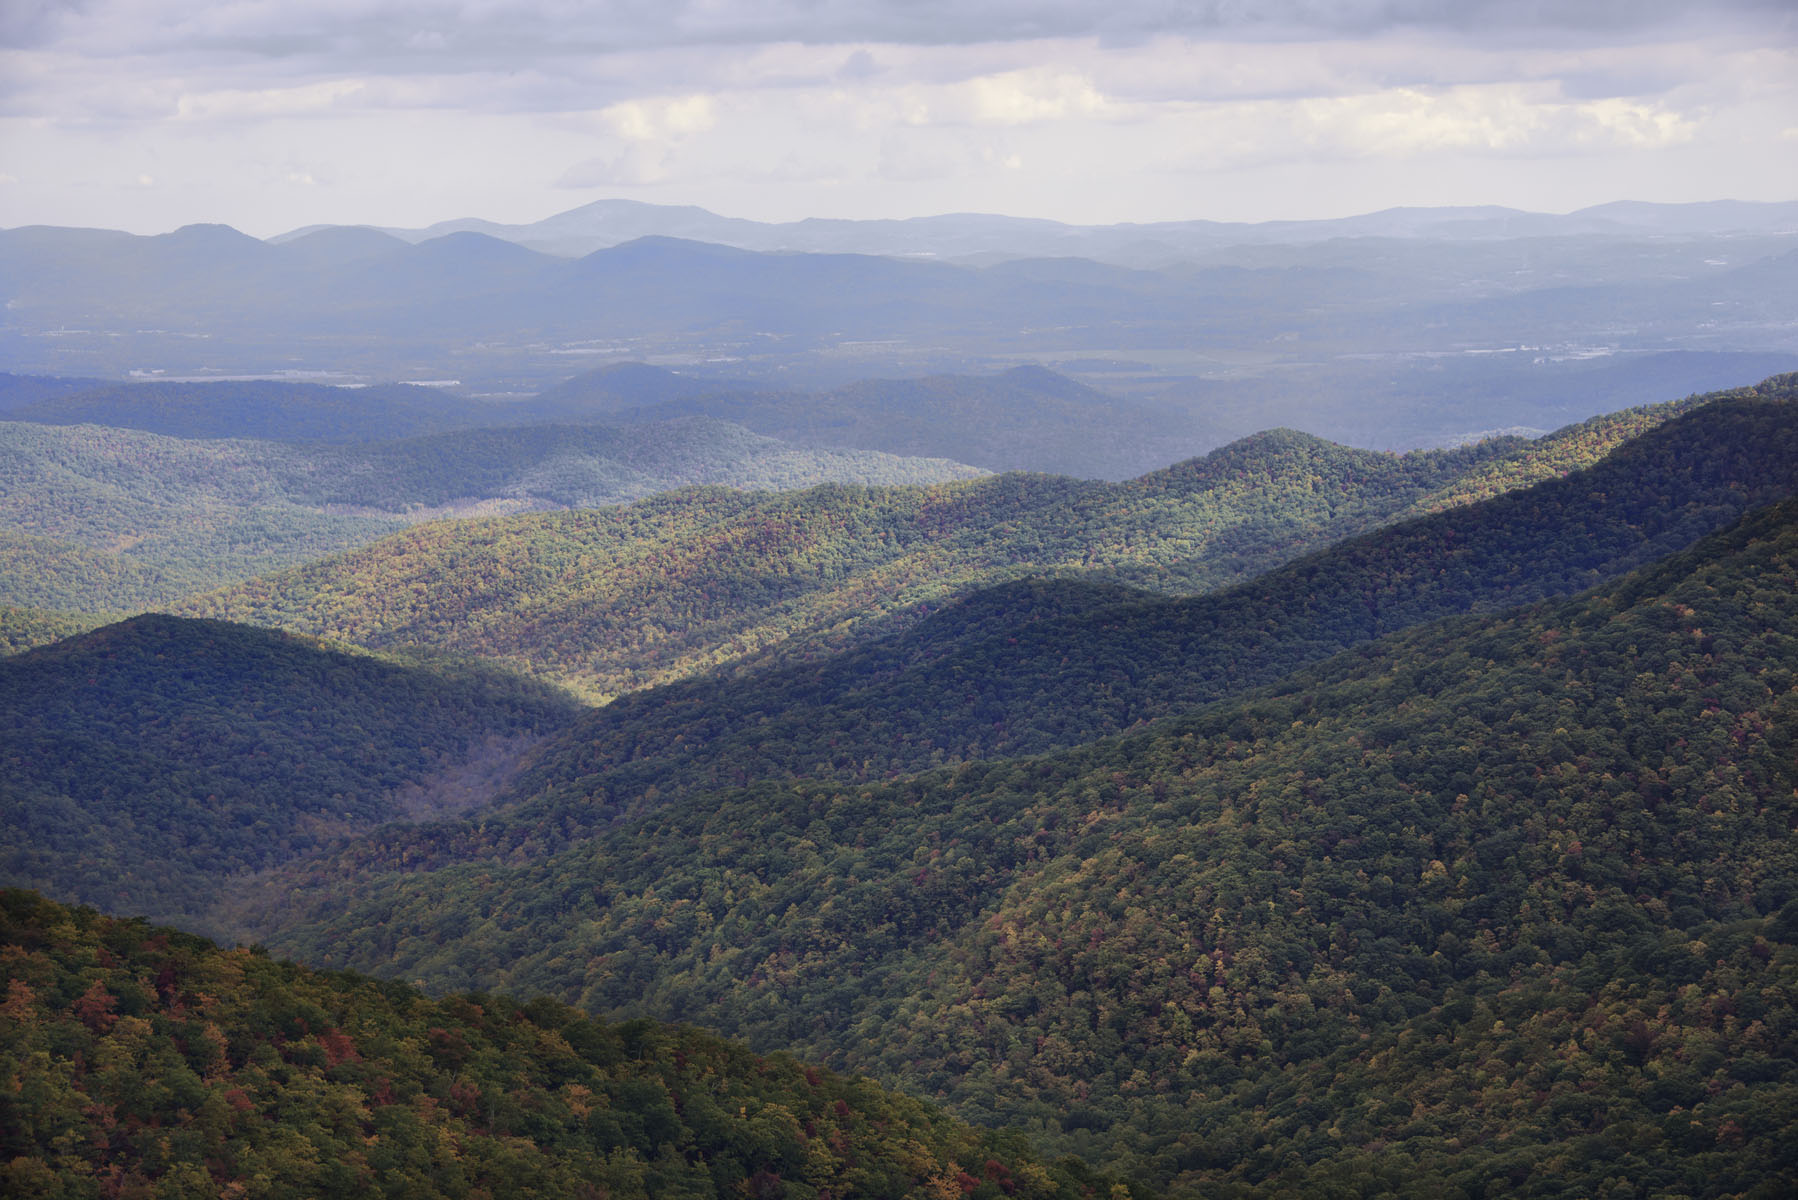 Overview of Fall Foliage in Smoky Mountains on Blue Ridge Parkway